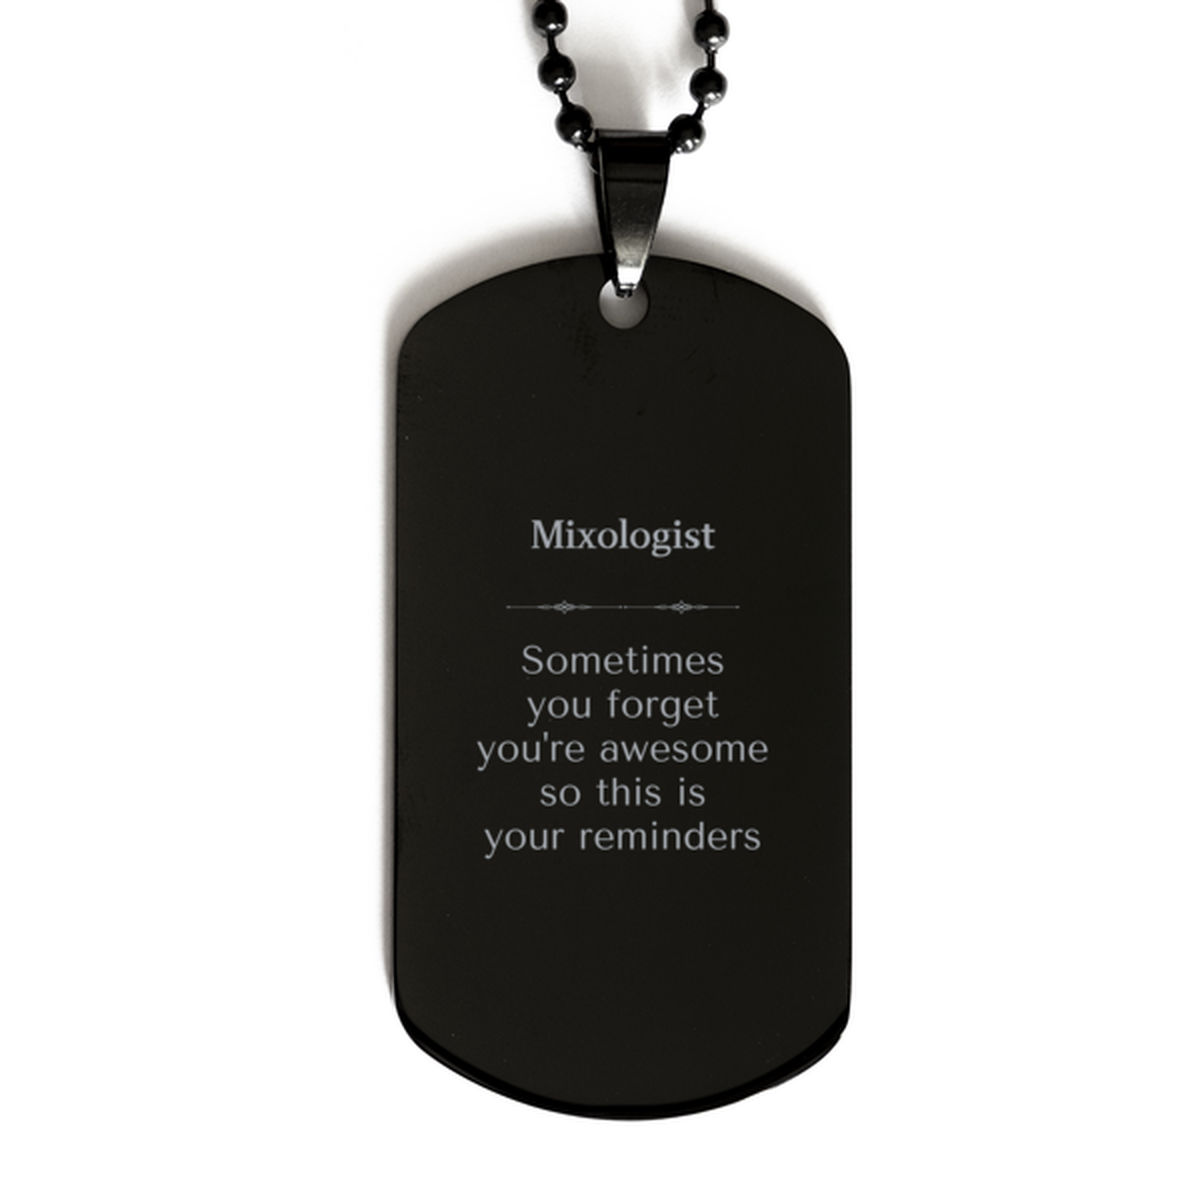 Sentimental Mixologist Black Dog Tag, Mixologist Sometimes you forget you're awesome so this is your reminders, Graduation Christmas Birthday Gifts for Mixologist, Men, Women, Coworkers